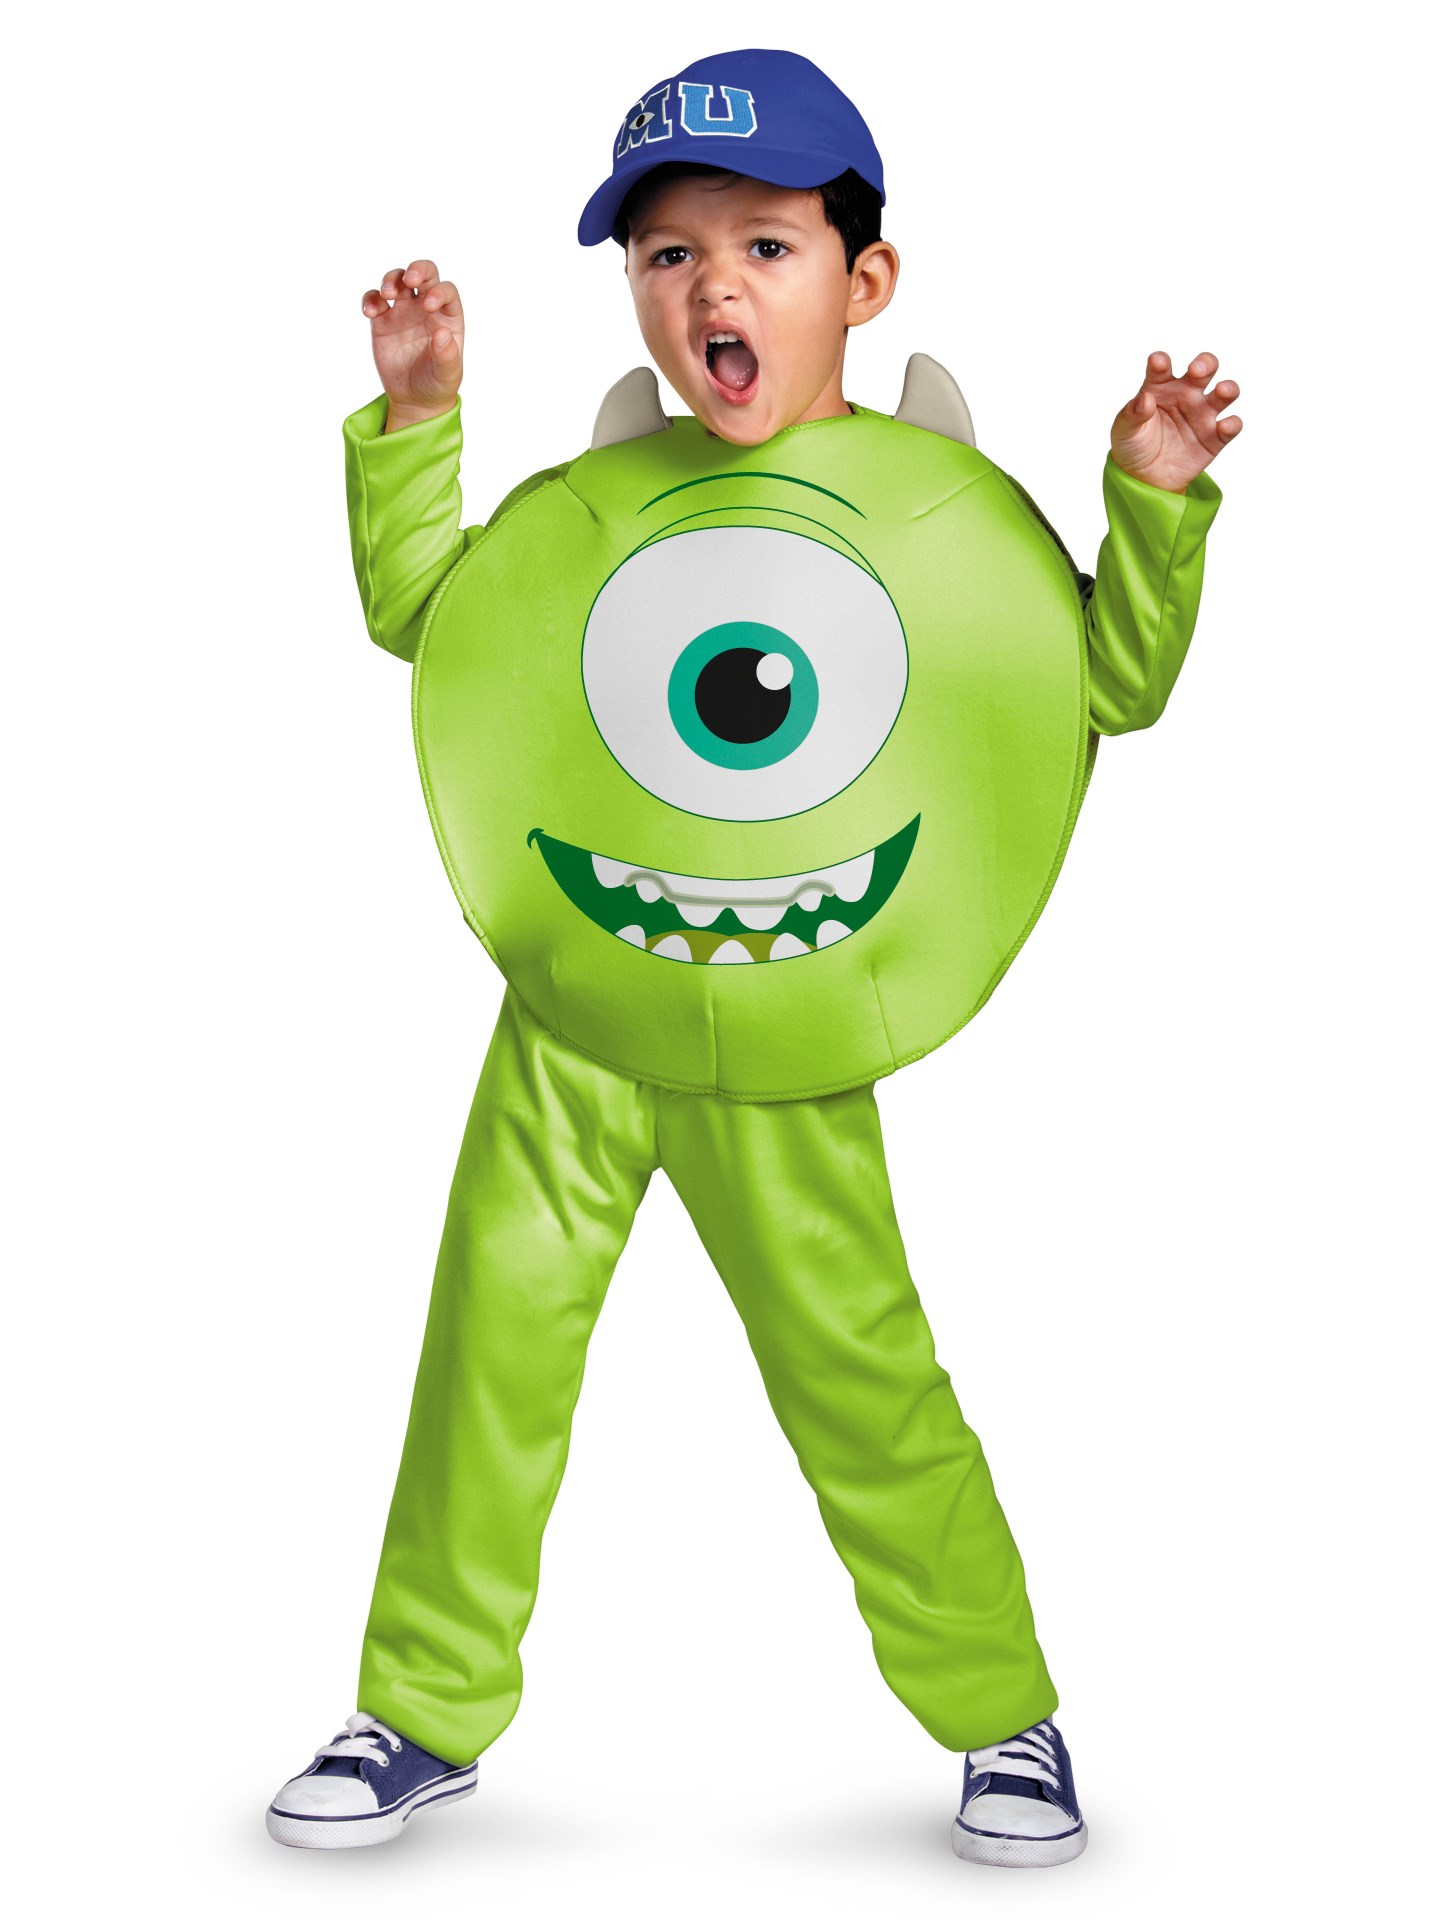 Monsters University Mike Classic Toddler / Child Costume